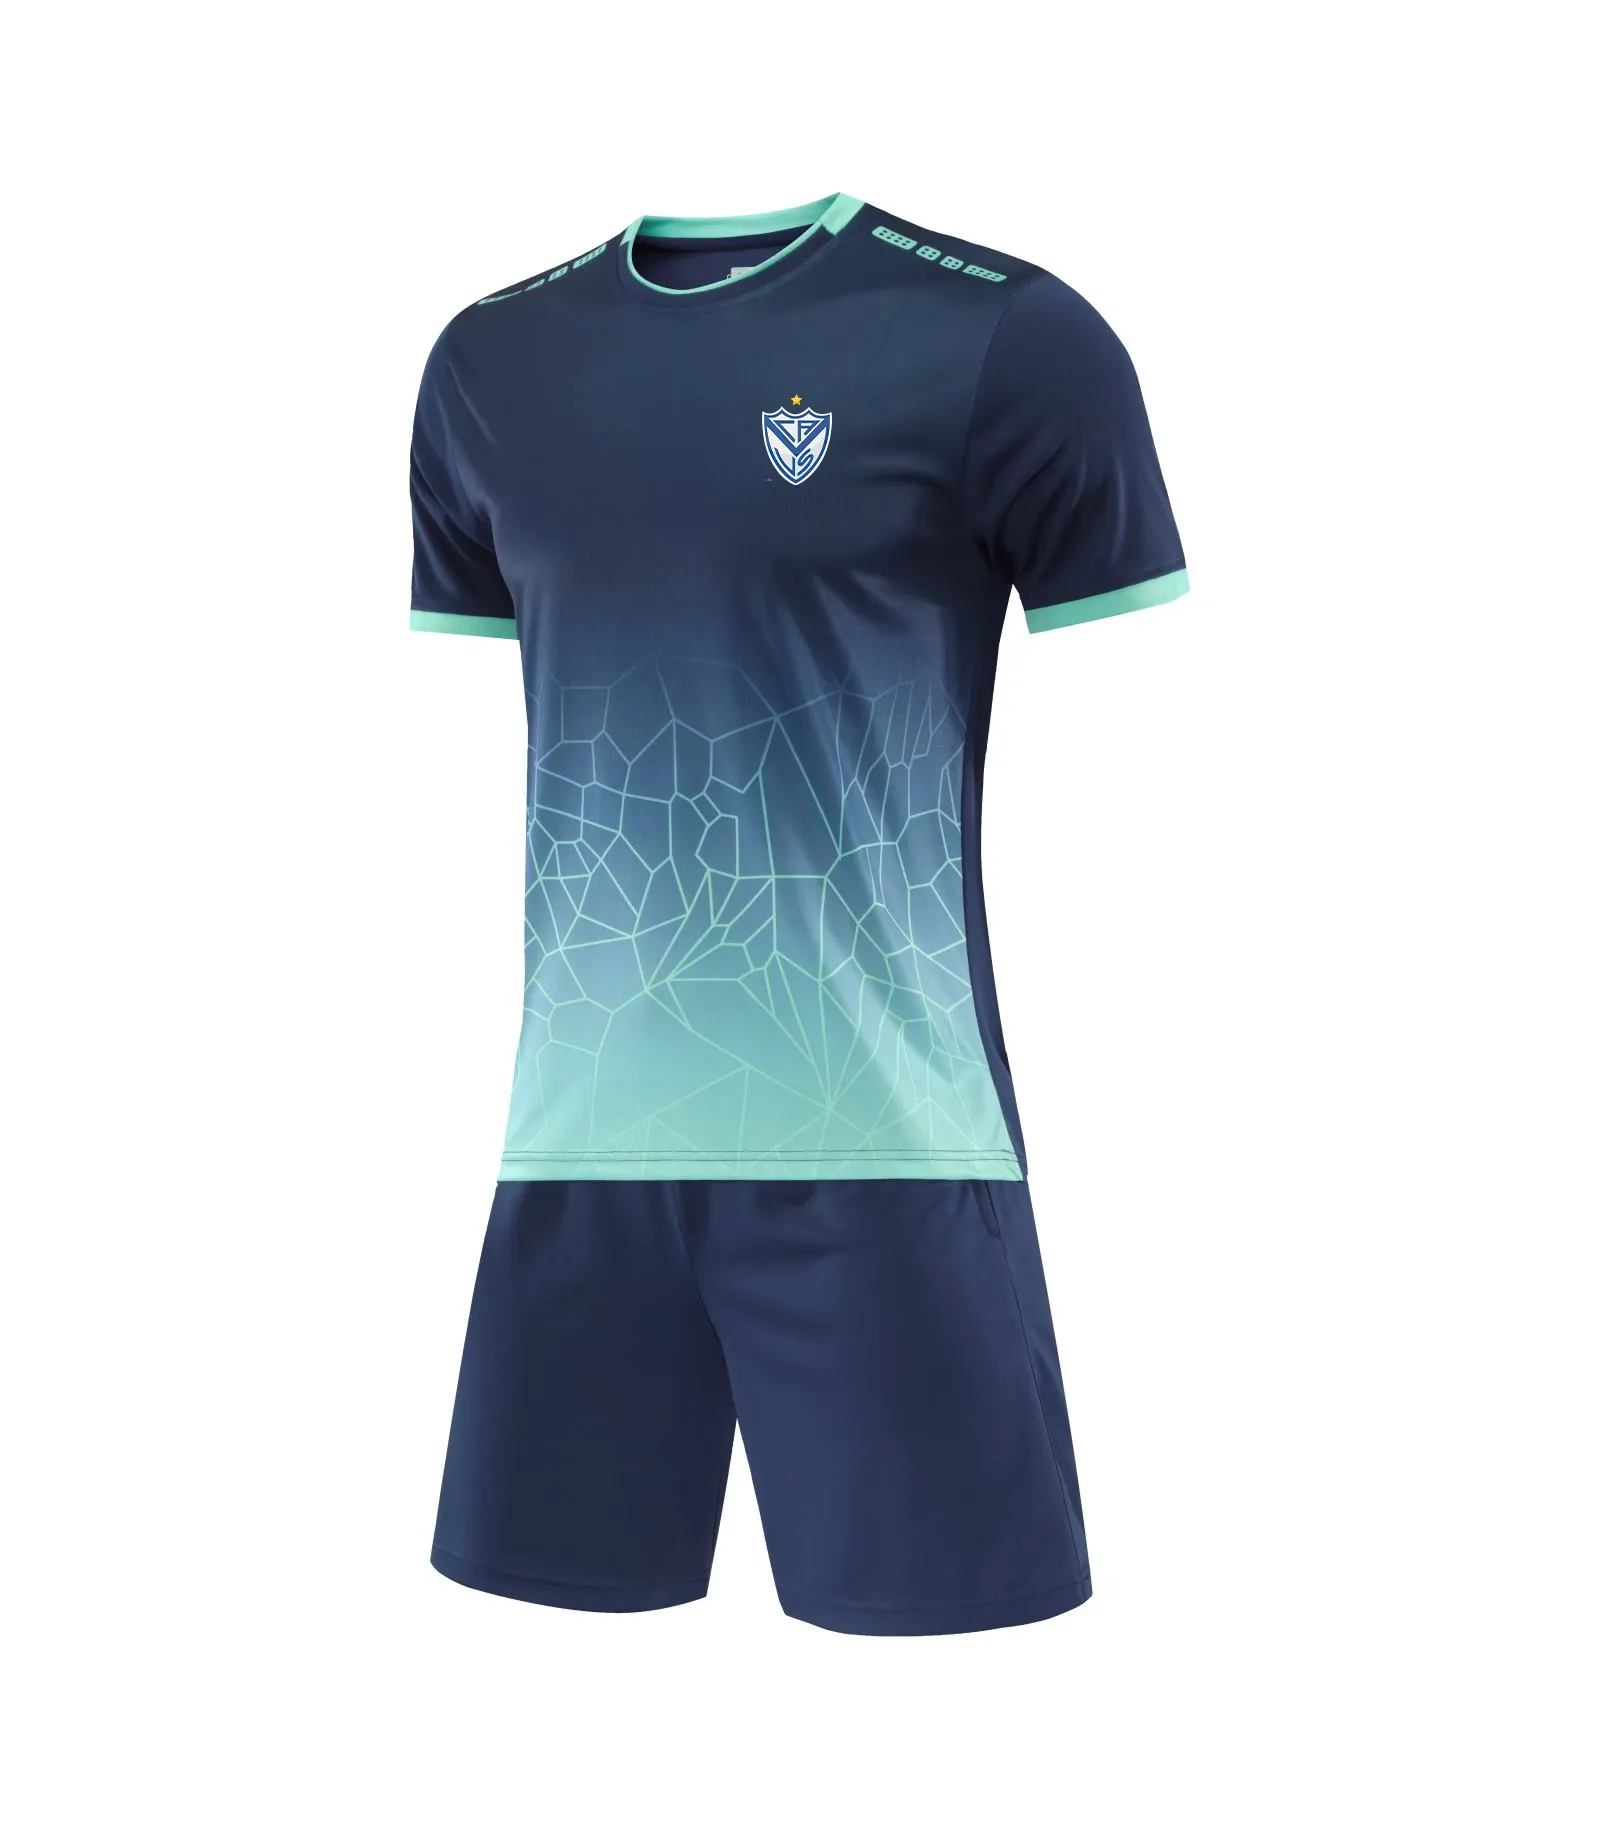 Velez Sarsfield Men's Tracksuits high-quality leisure sport outdoor training suits with short sleeves and thin quick-drying T-shirts